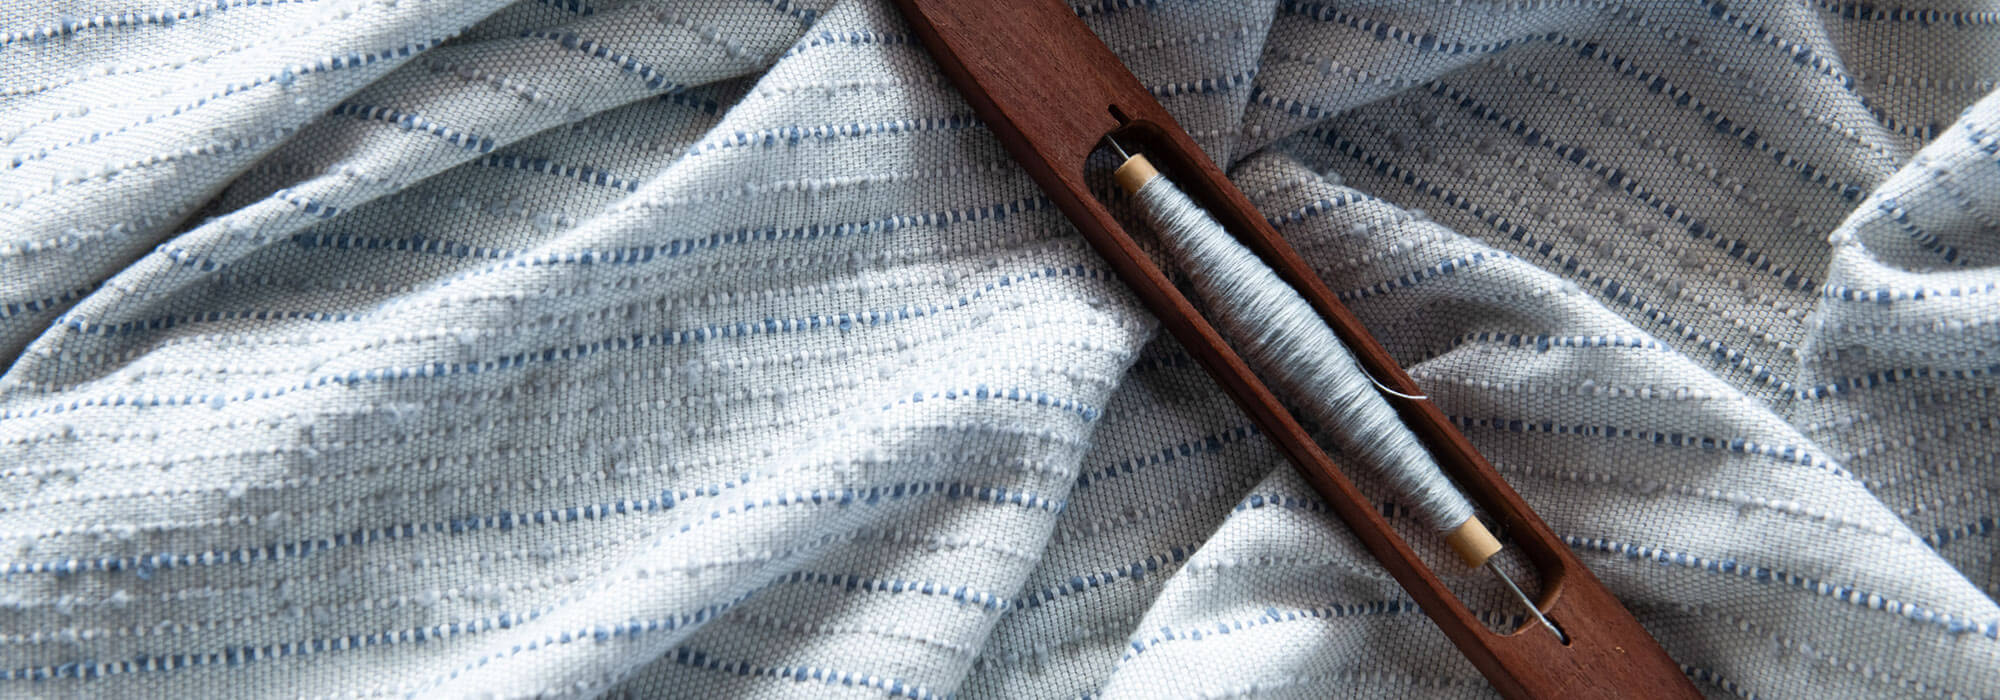 Handwoven sustainably produced fabric for interior designers